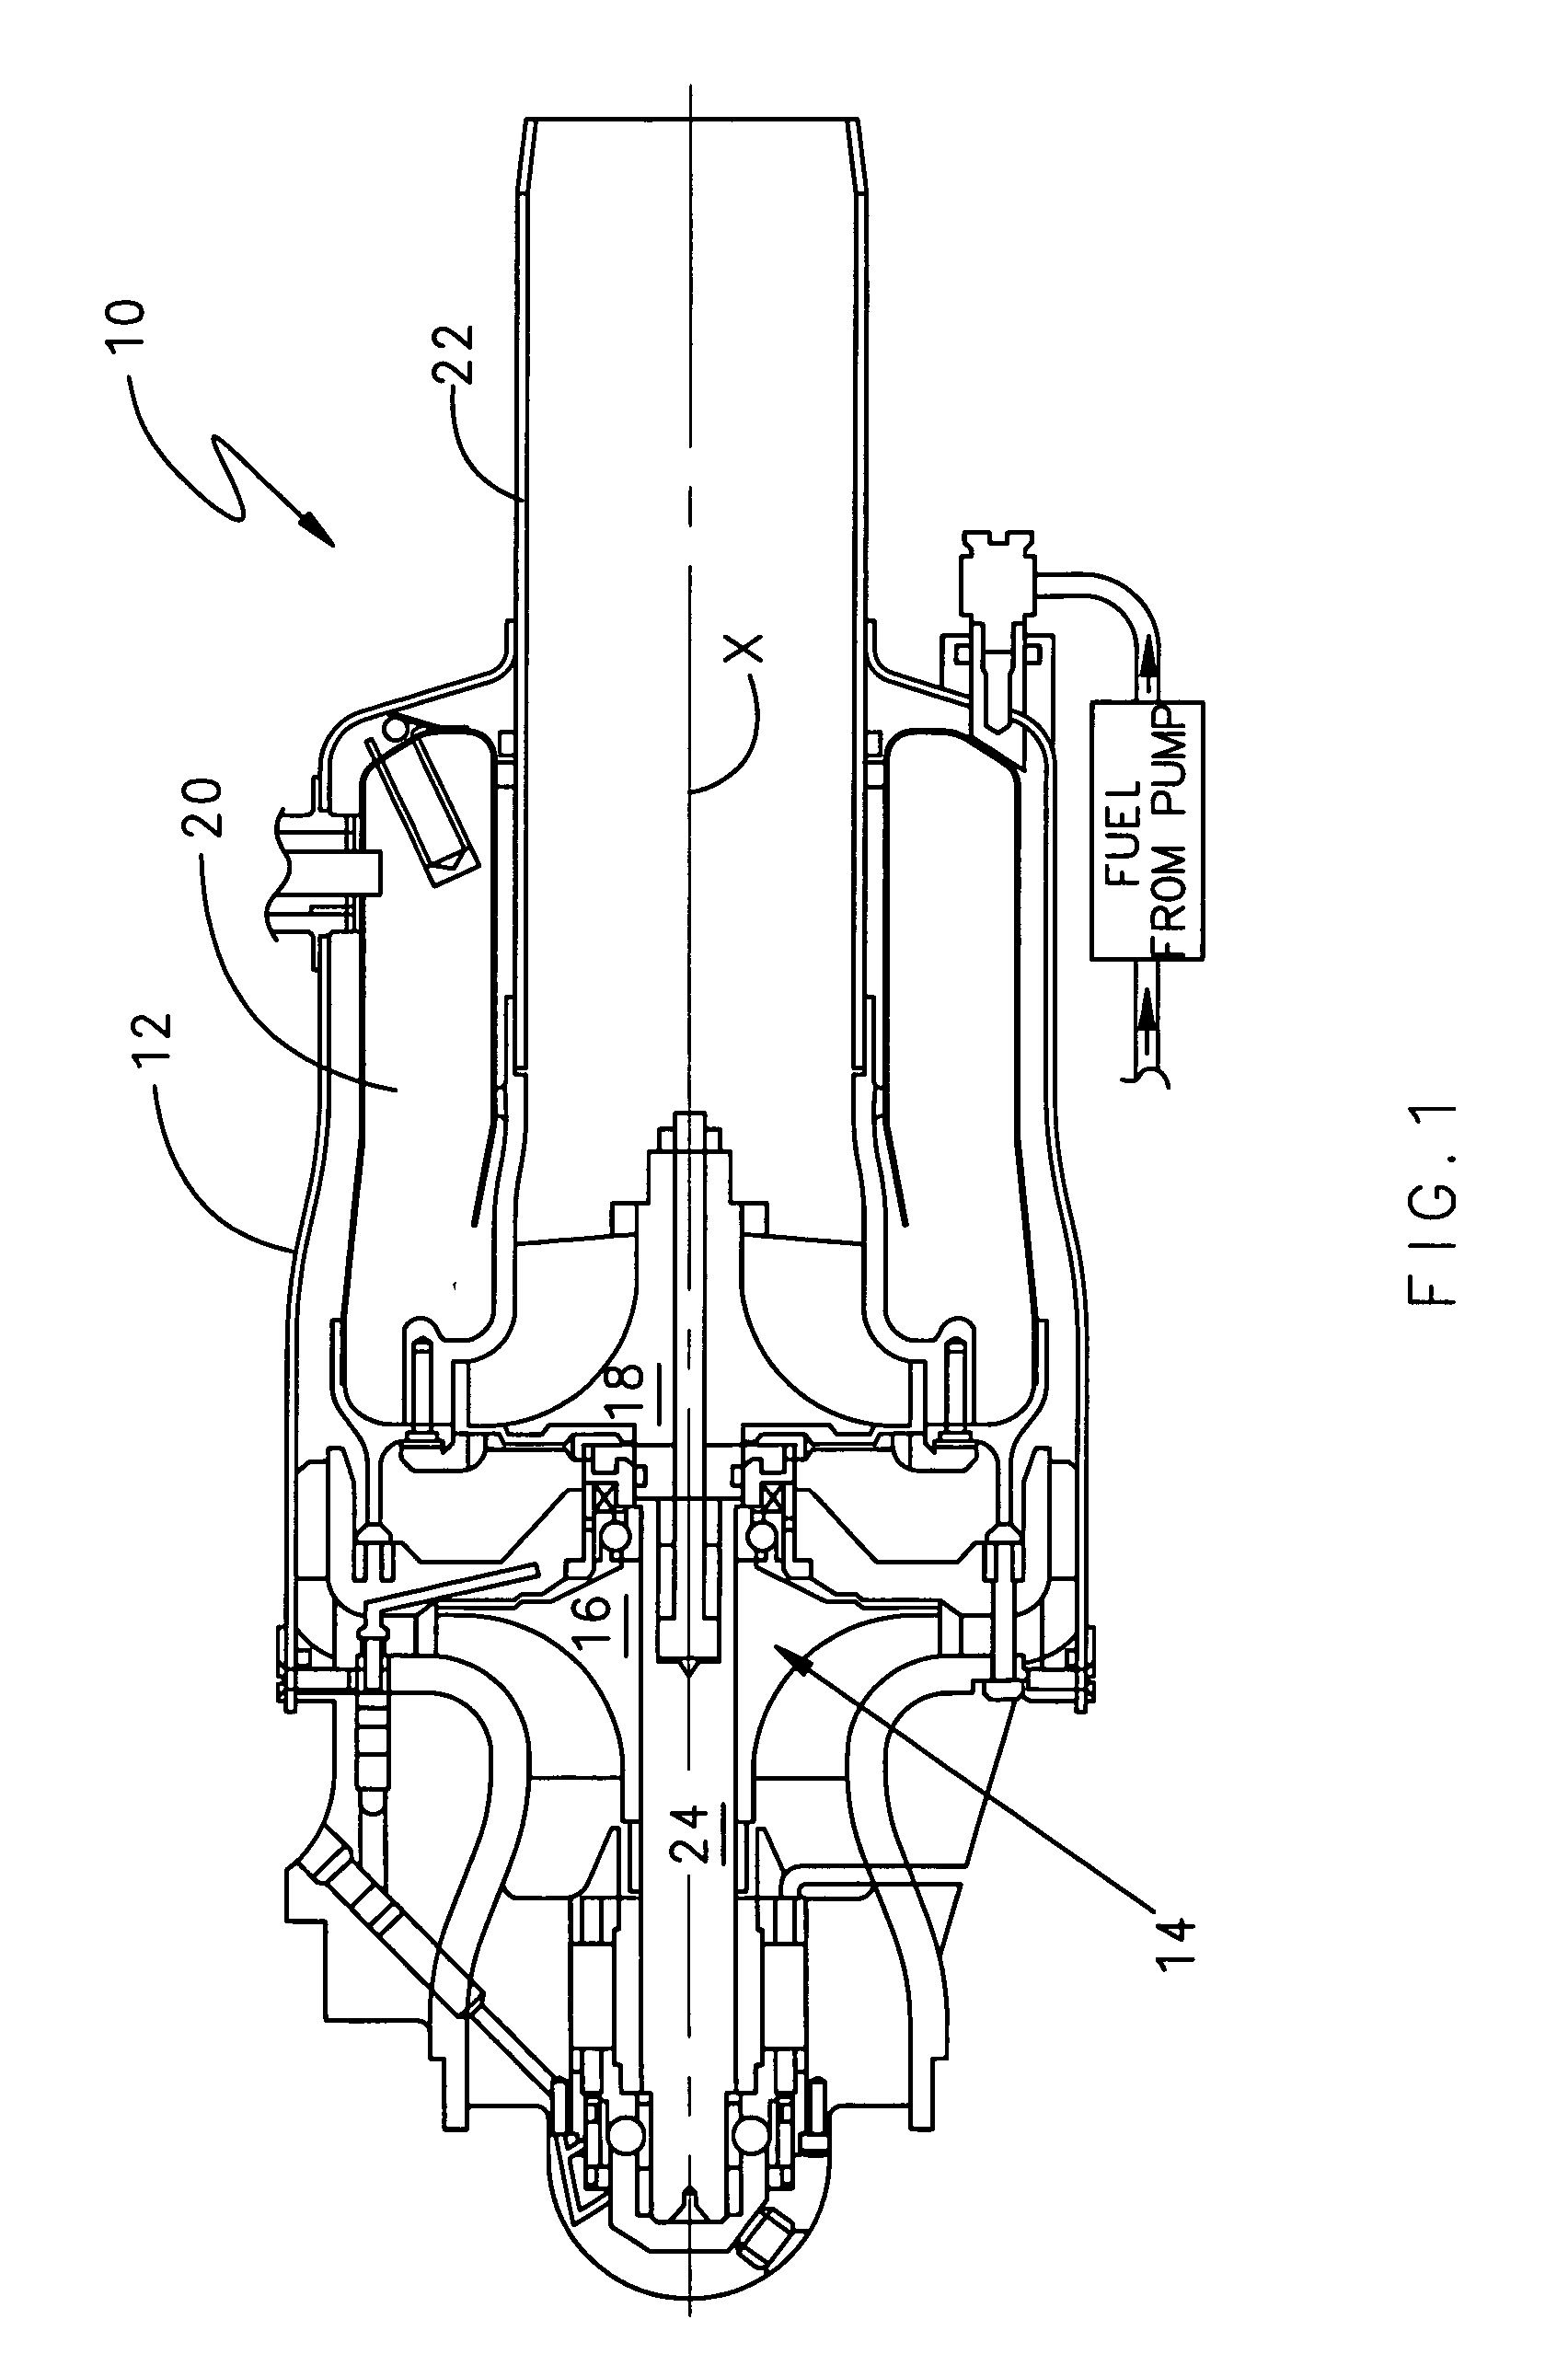 Mechanical coupling for a rotor shaft assembly of dissimilar materials